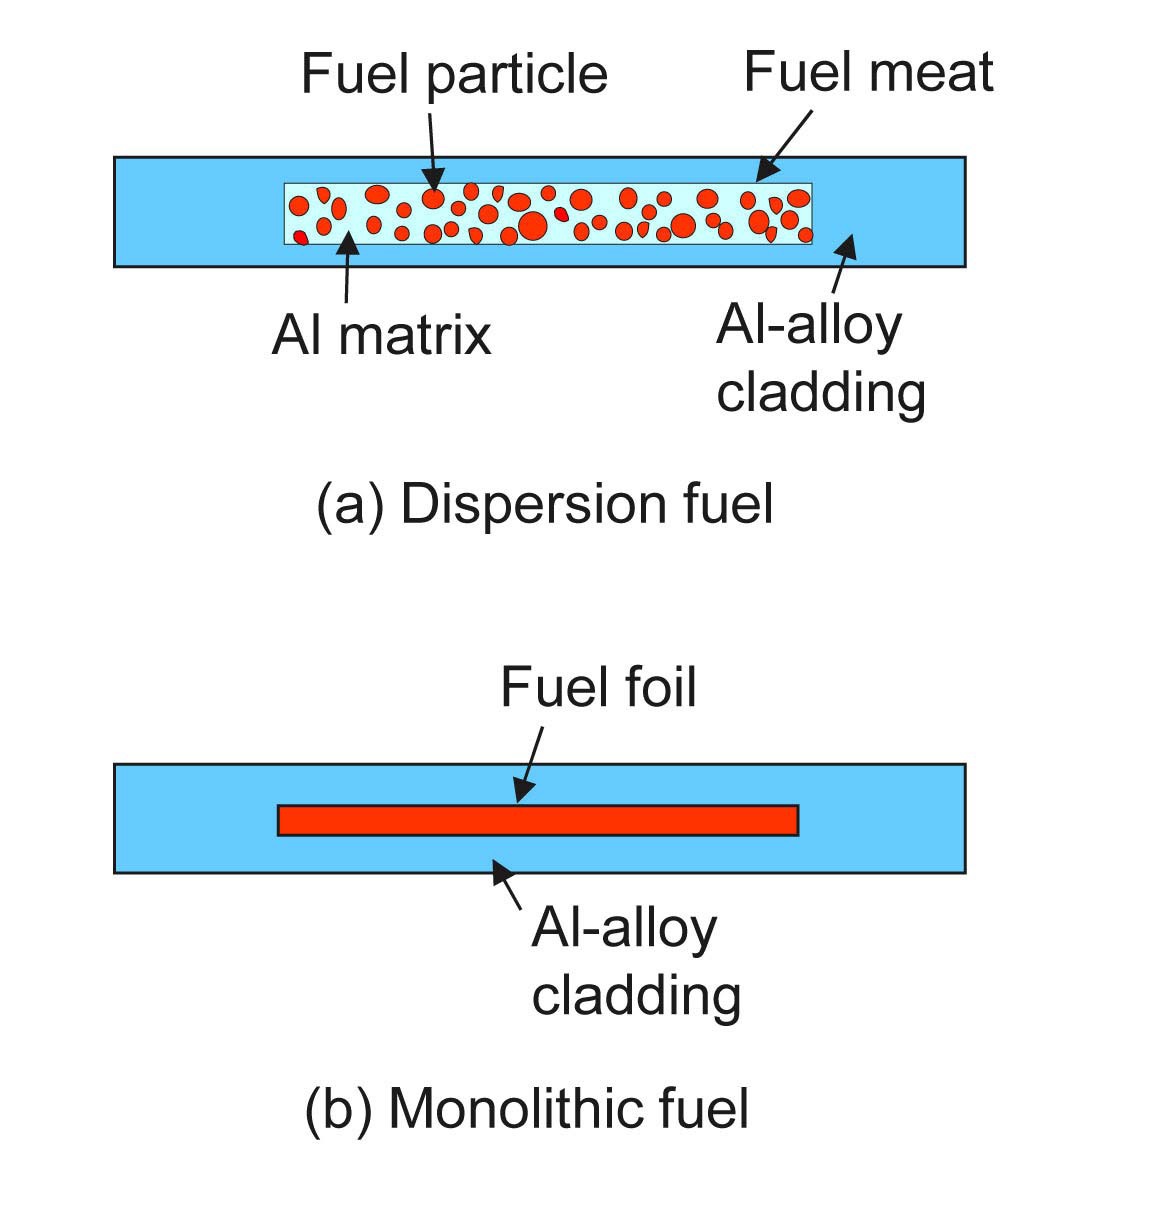 Schematic Illustration of Cross Section Views of
Dispersion Fuel and Monolithic Fuel Forms